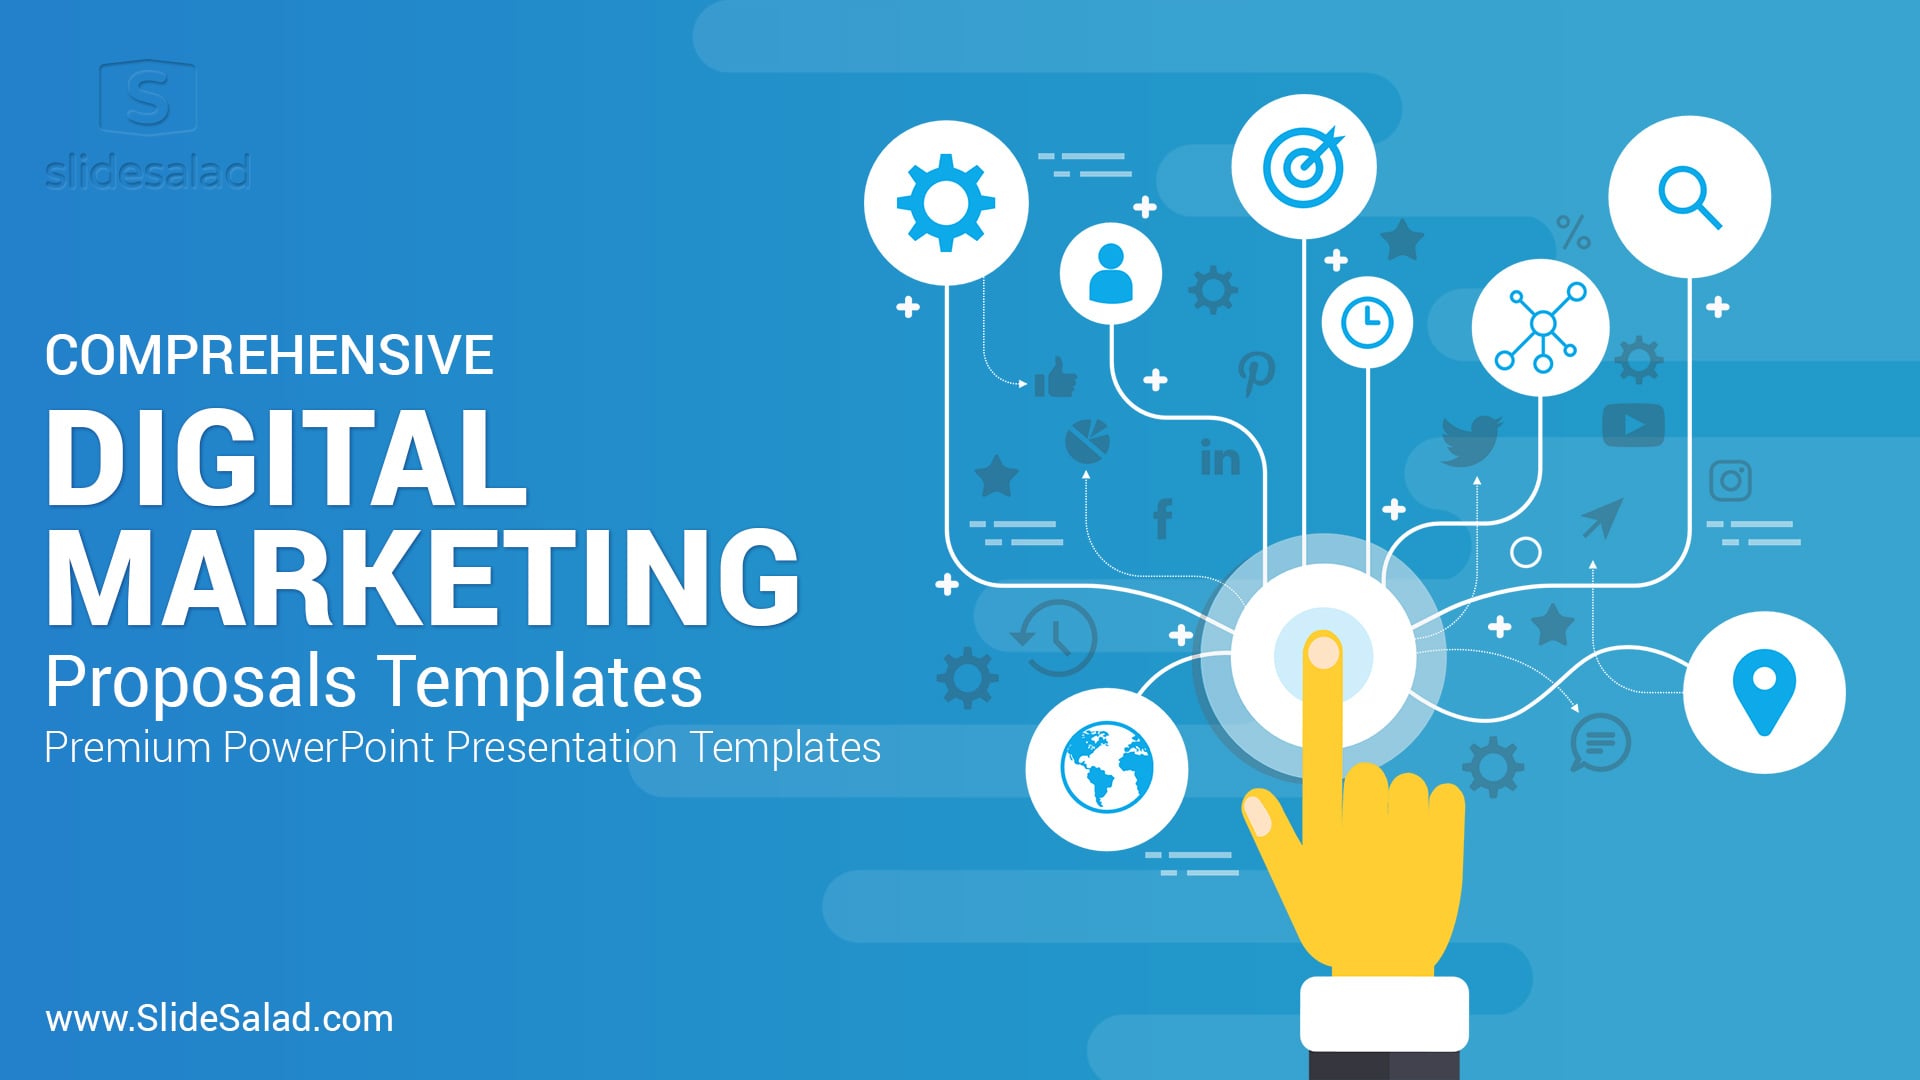 Best Digital Marketing Proposals PowerPoint Templates – Top Online Marketing Proposal Themes for PowerPoint Presentations